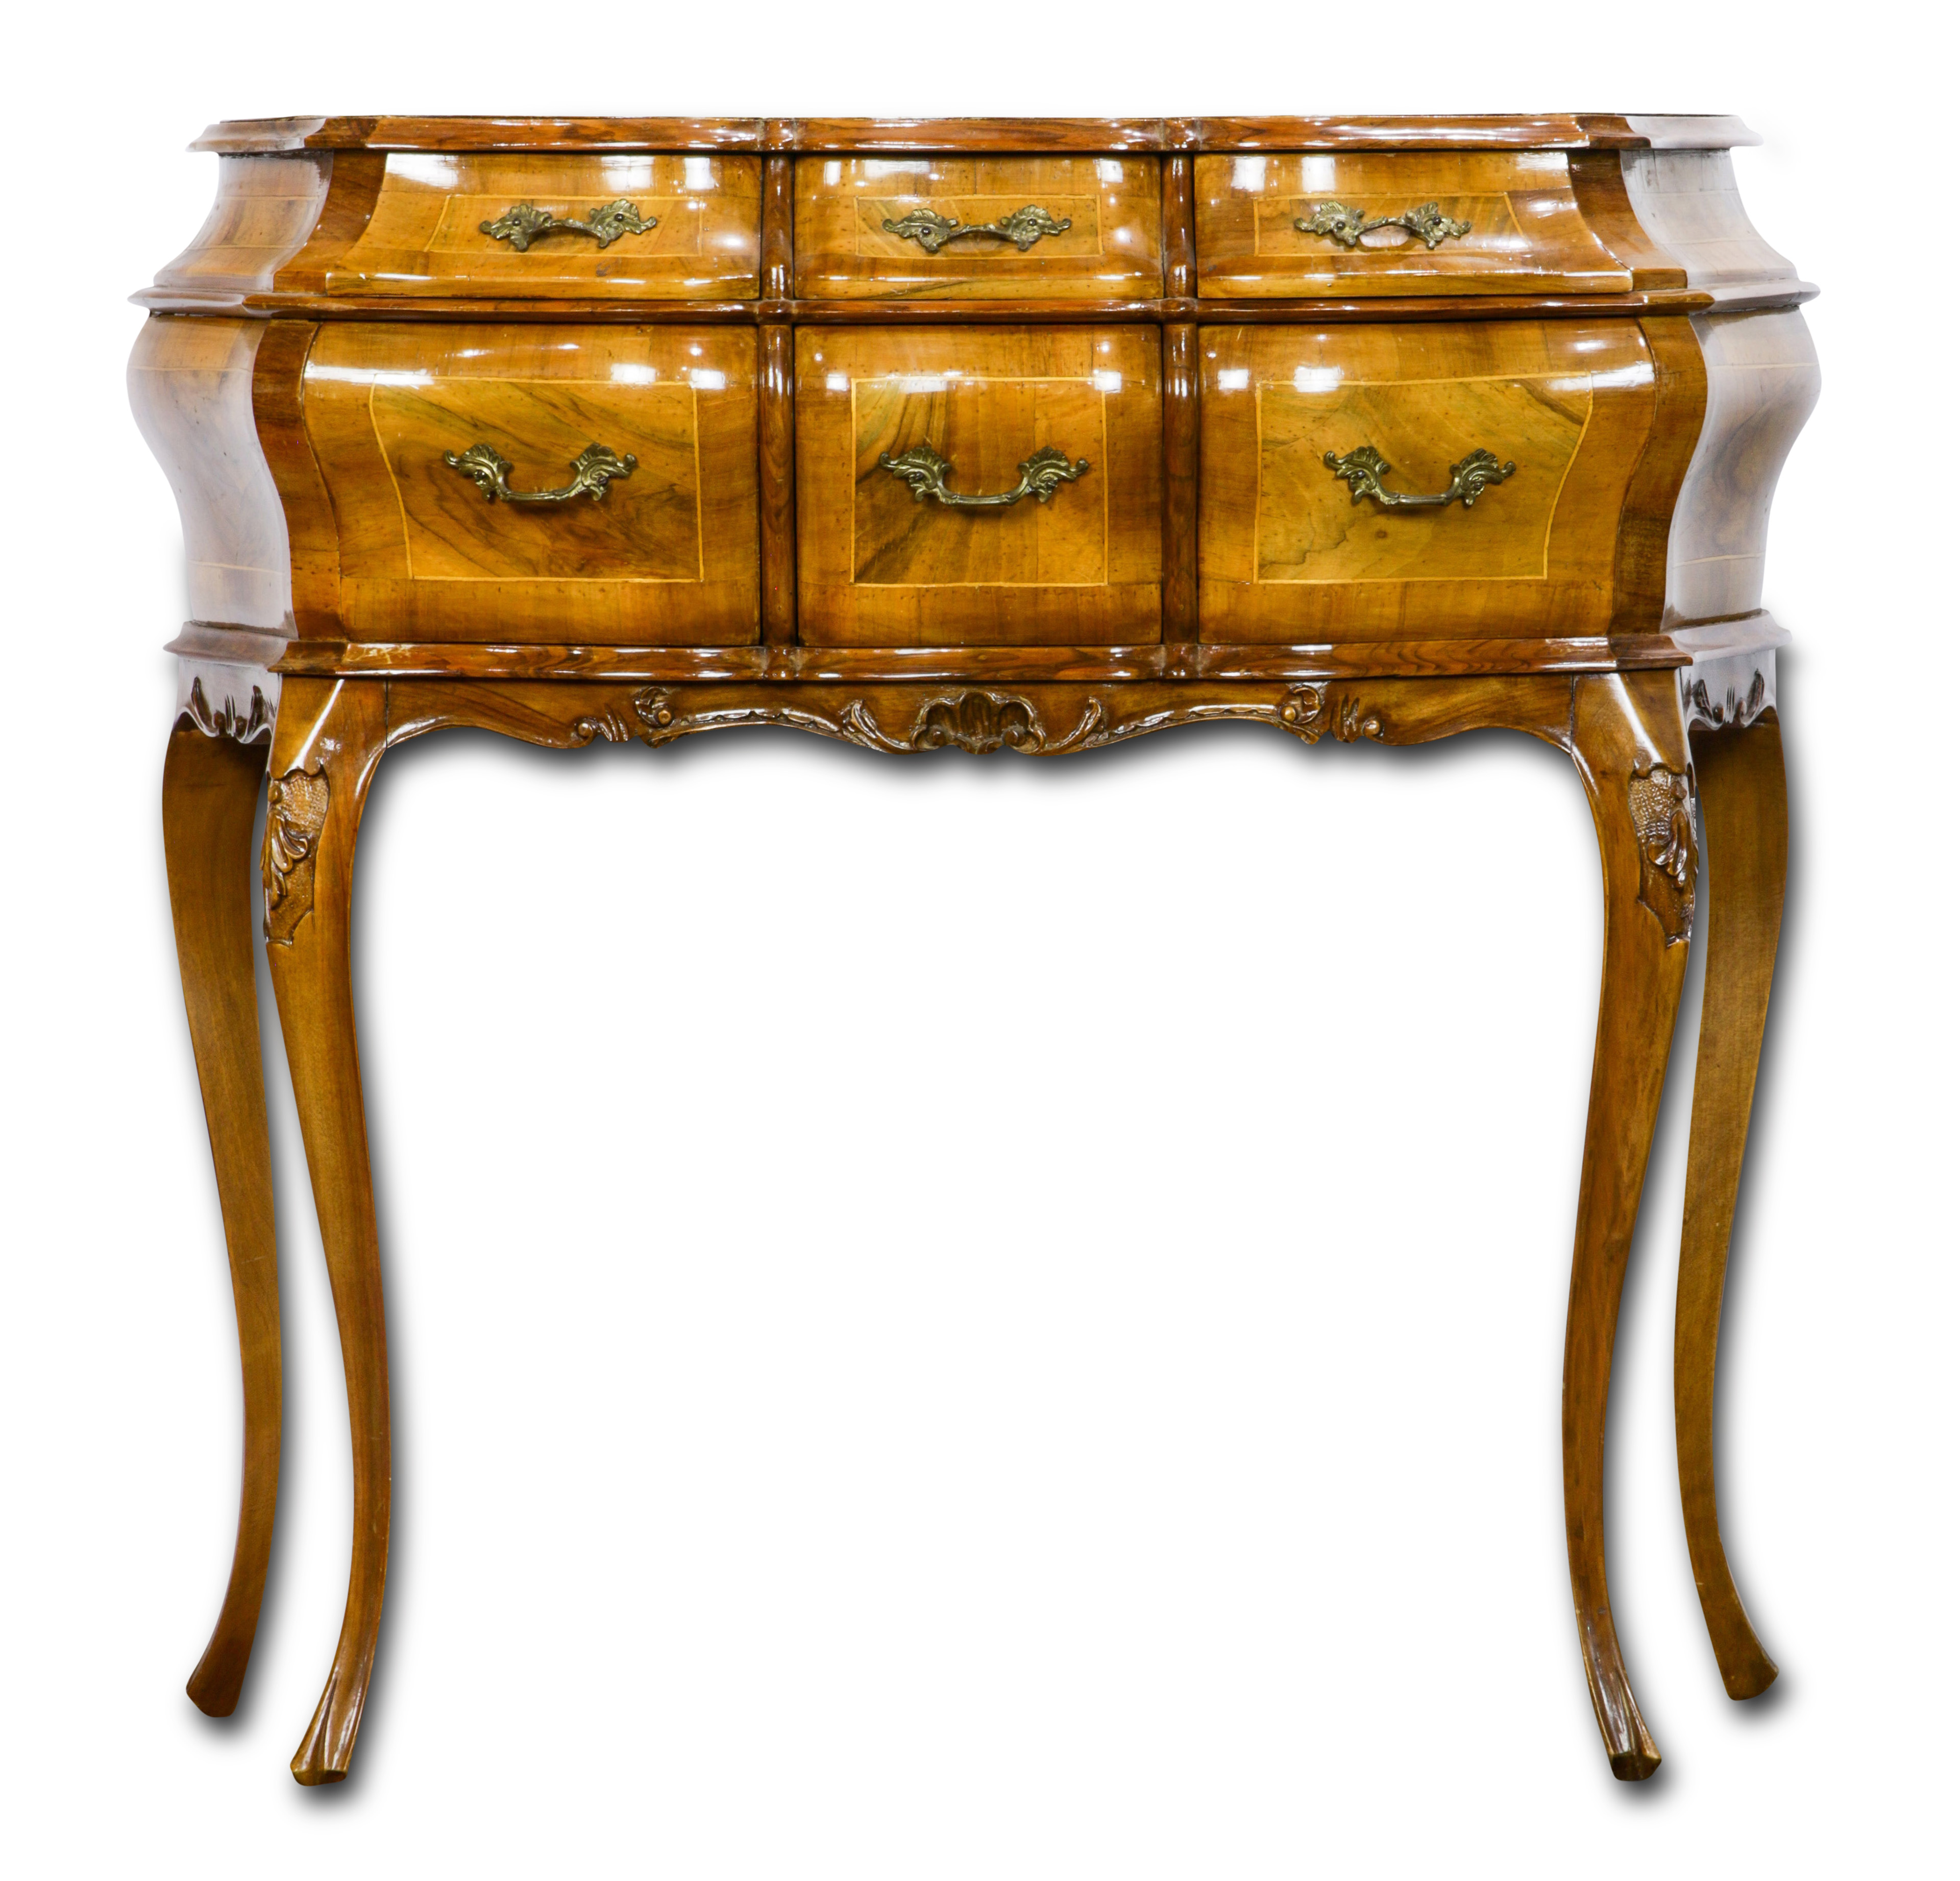 A ROCOCO STYLE INLAID COMMODE A 3a5b68